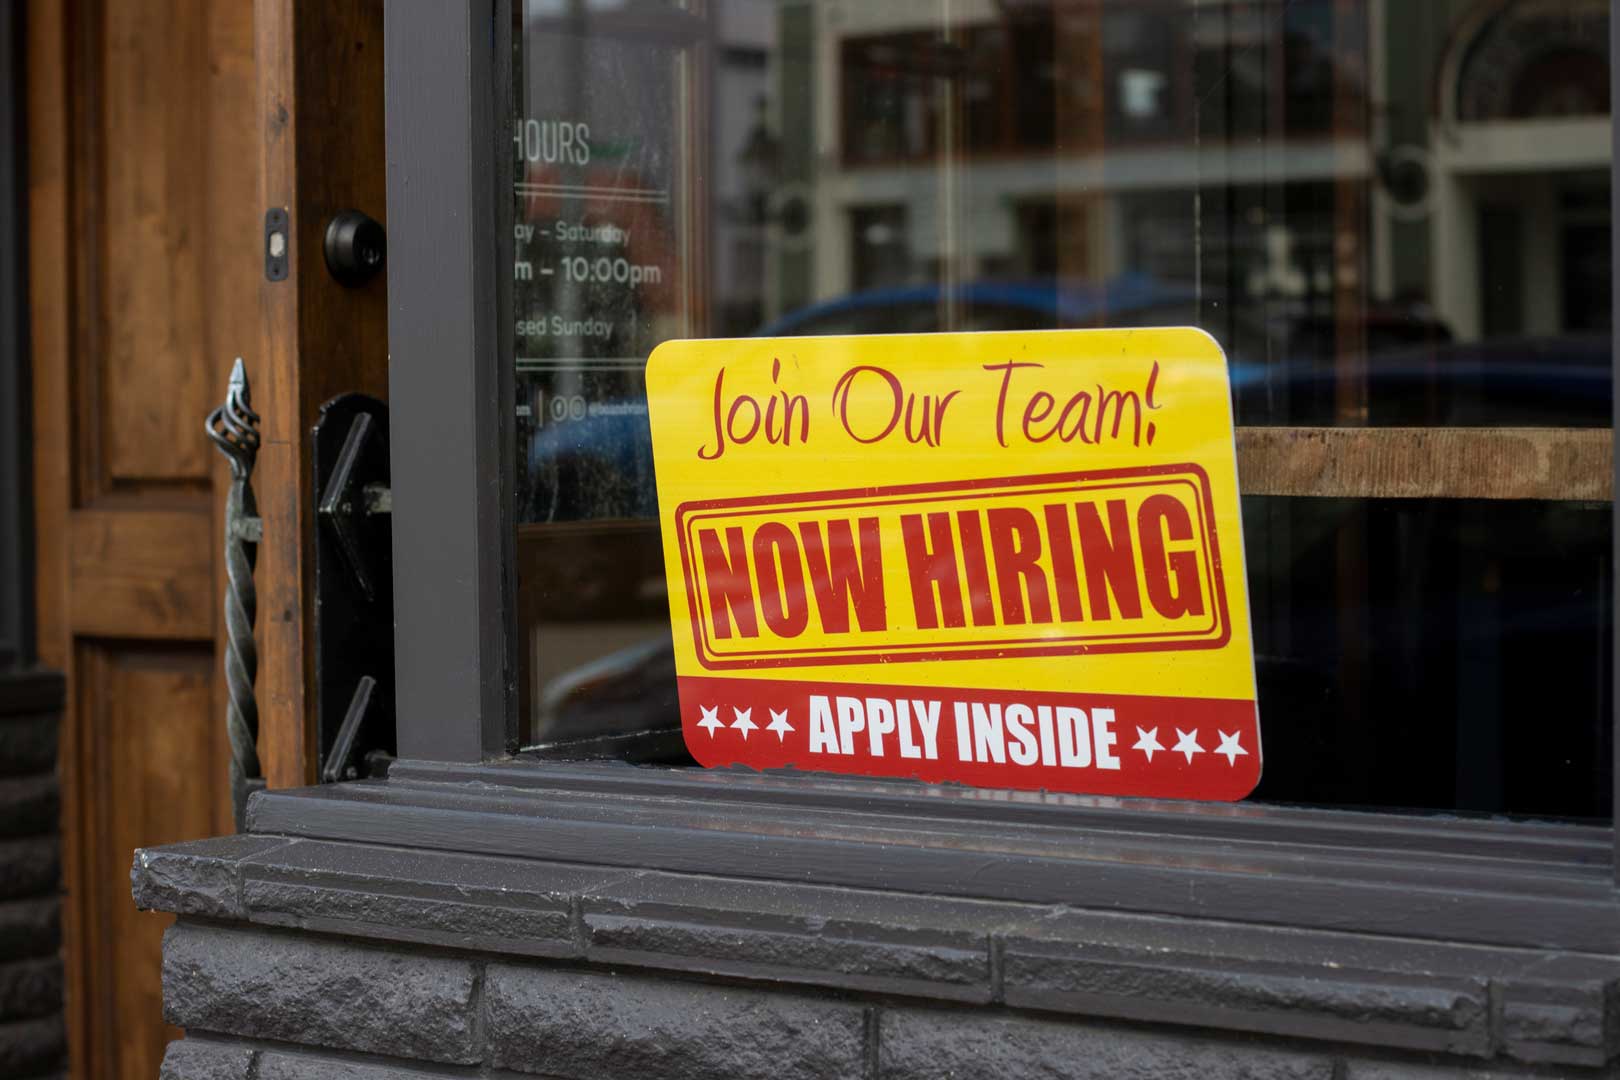 The Now Hiring sign is visible at the storefront